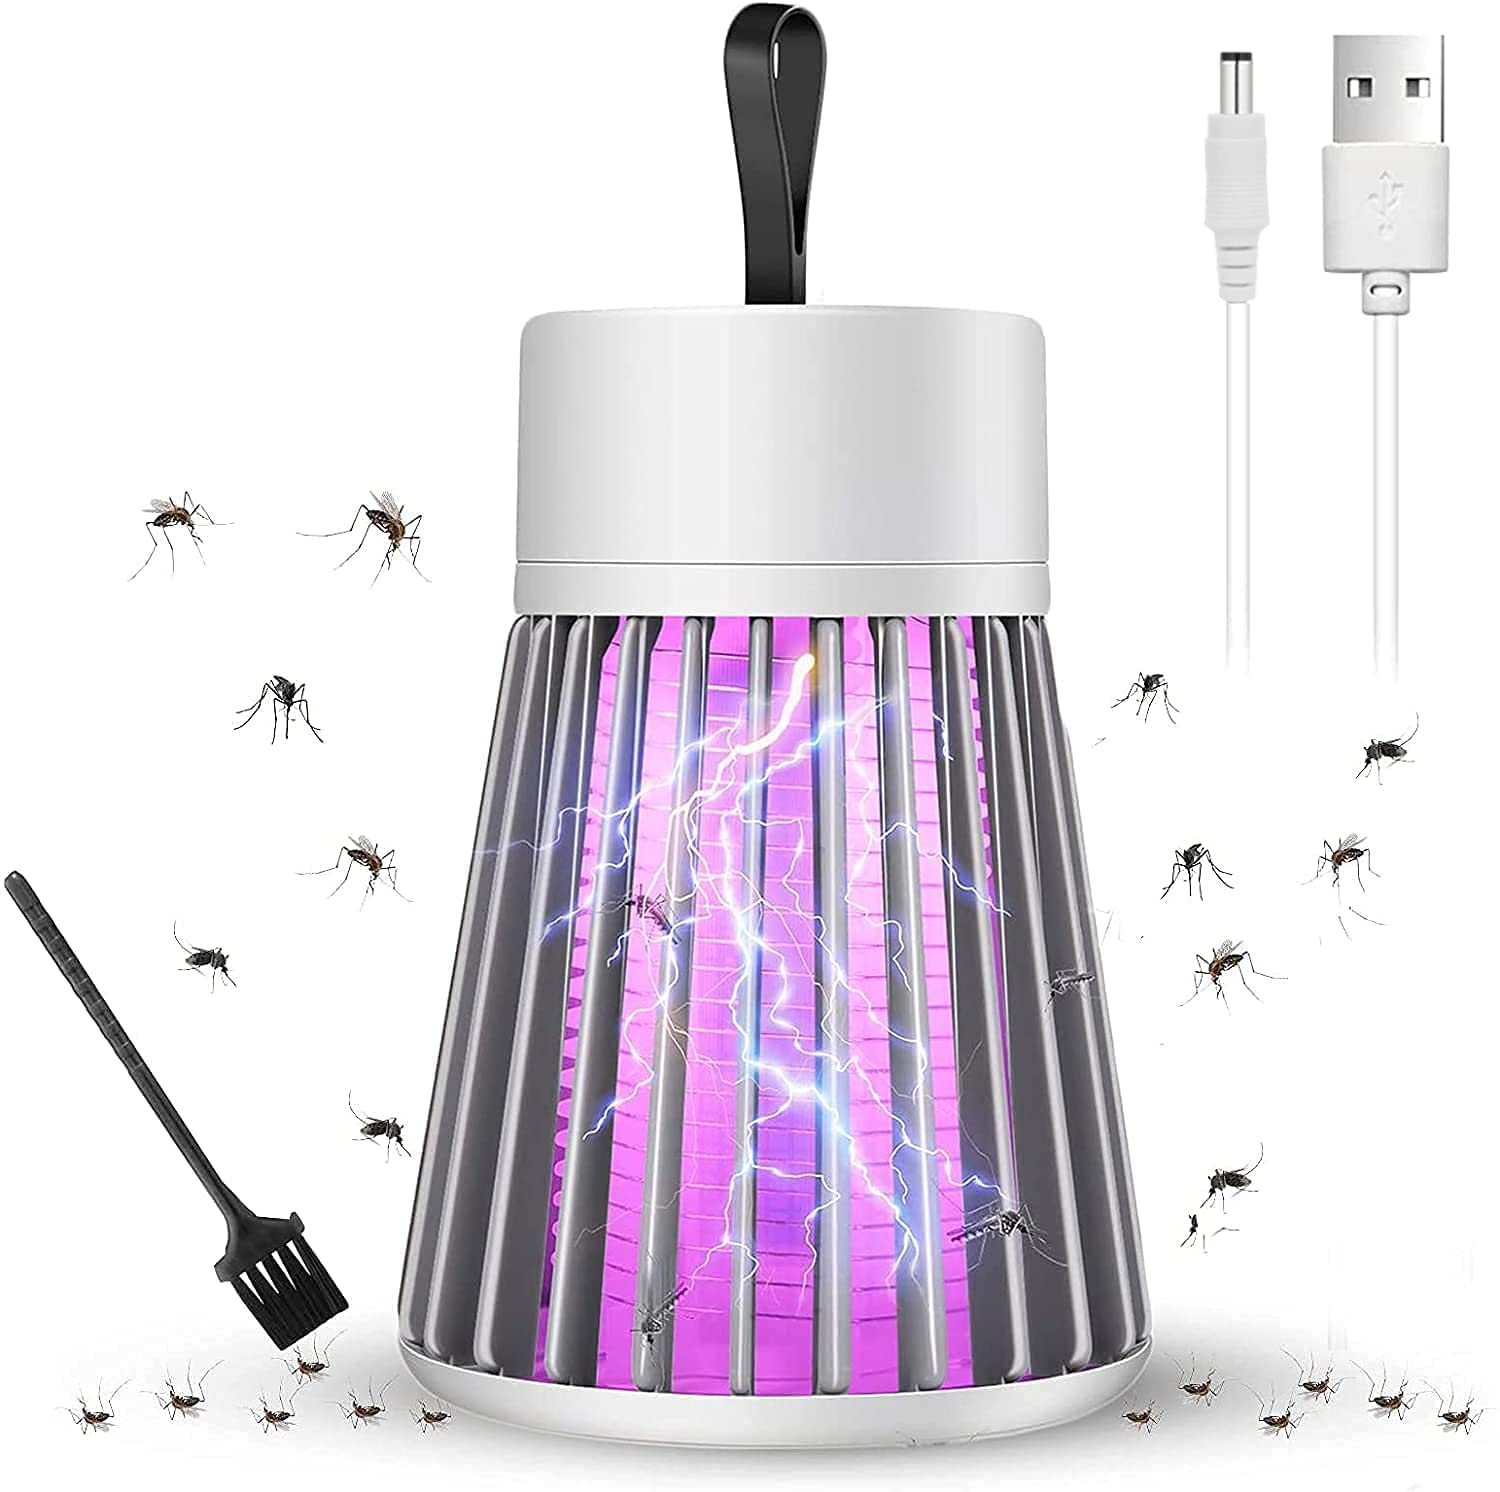 Mosquito Killer Lamp Trap Machine with UV LED Light Electric Shock Bug Zapper, 5W for Insects, USB Powered